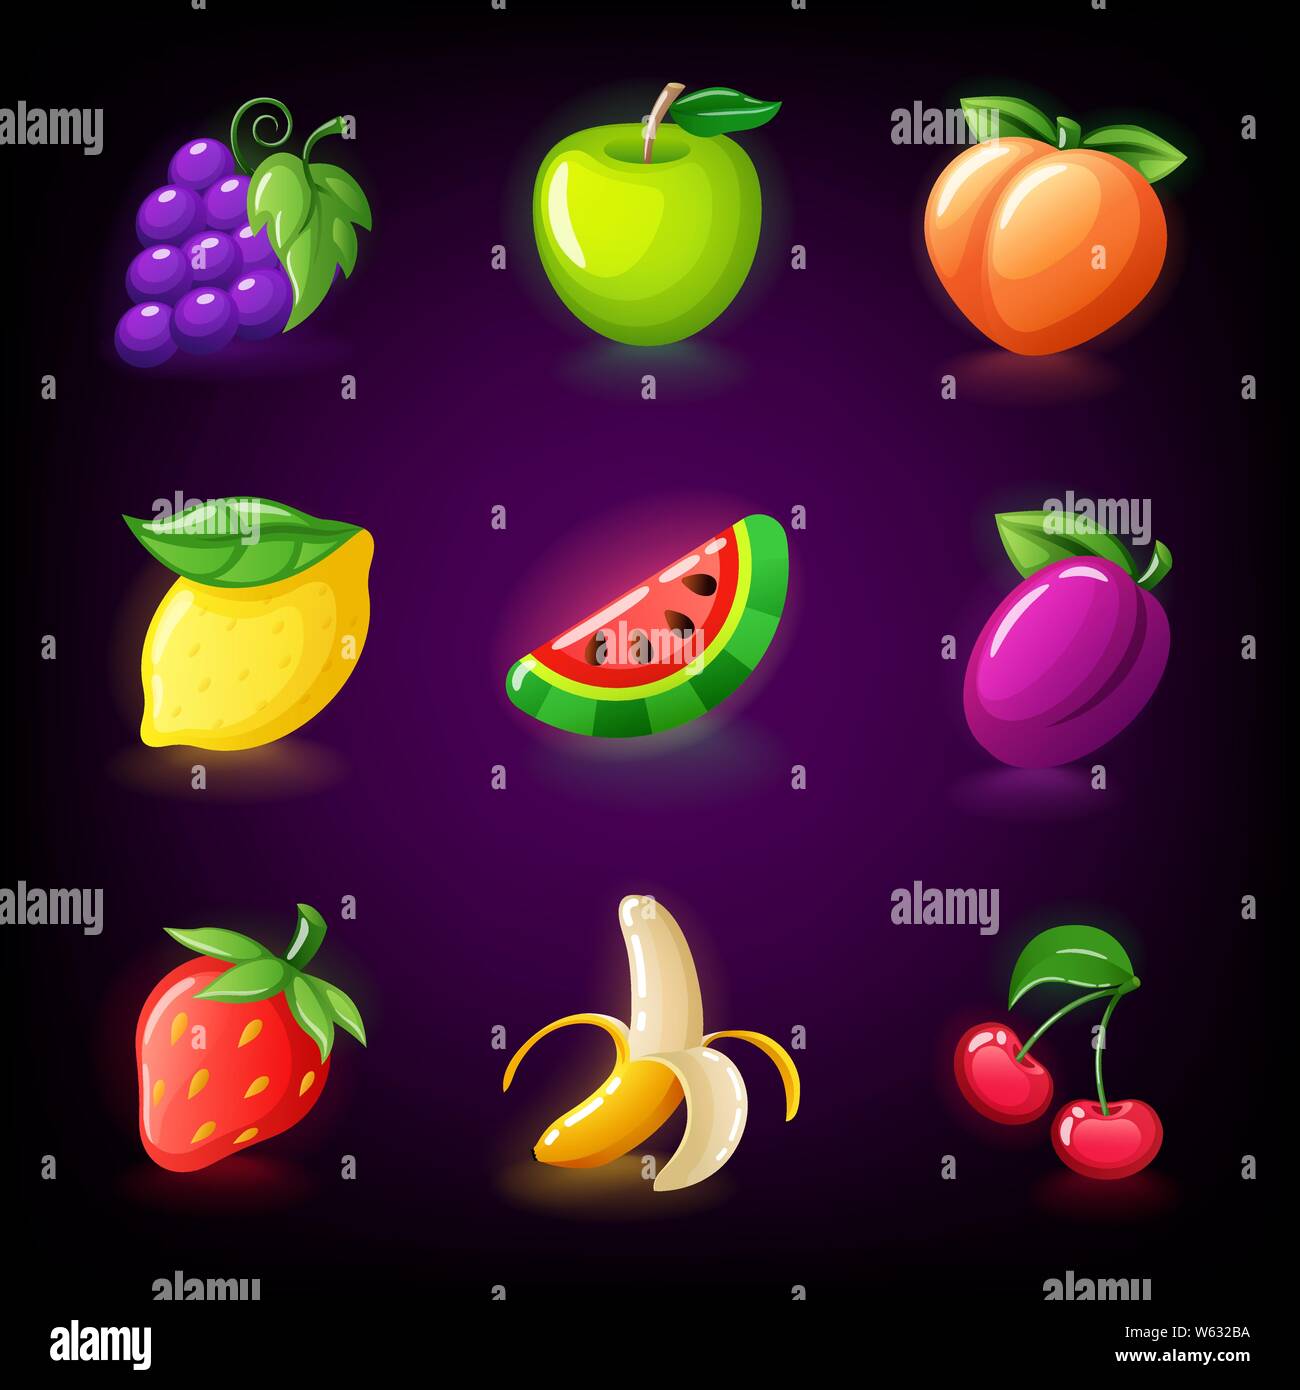 Colorful fruit slots icon set for casino slot machine, gambling games, icons for mobile arcade and puzzle games vector Stock Vector